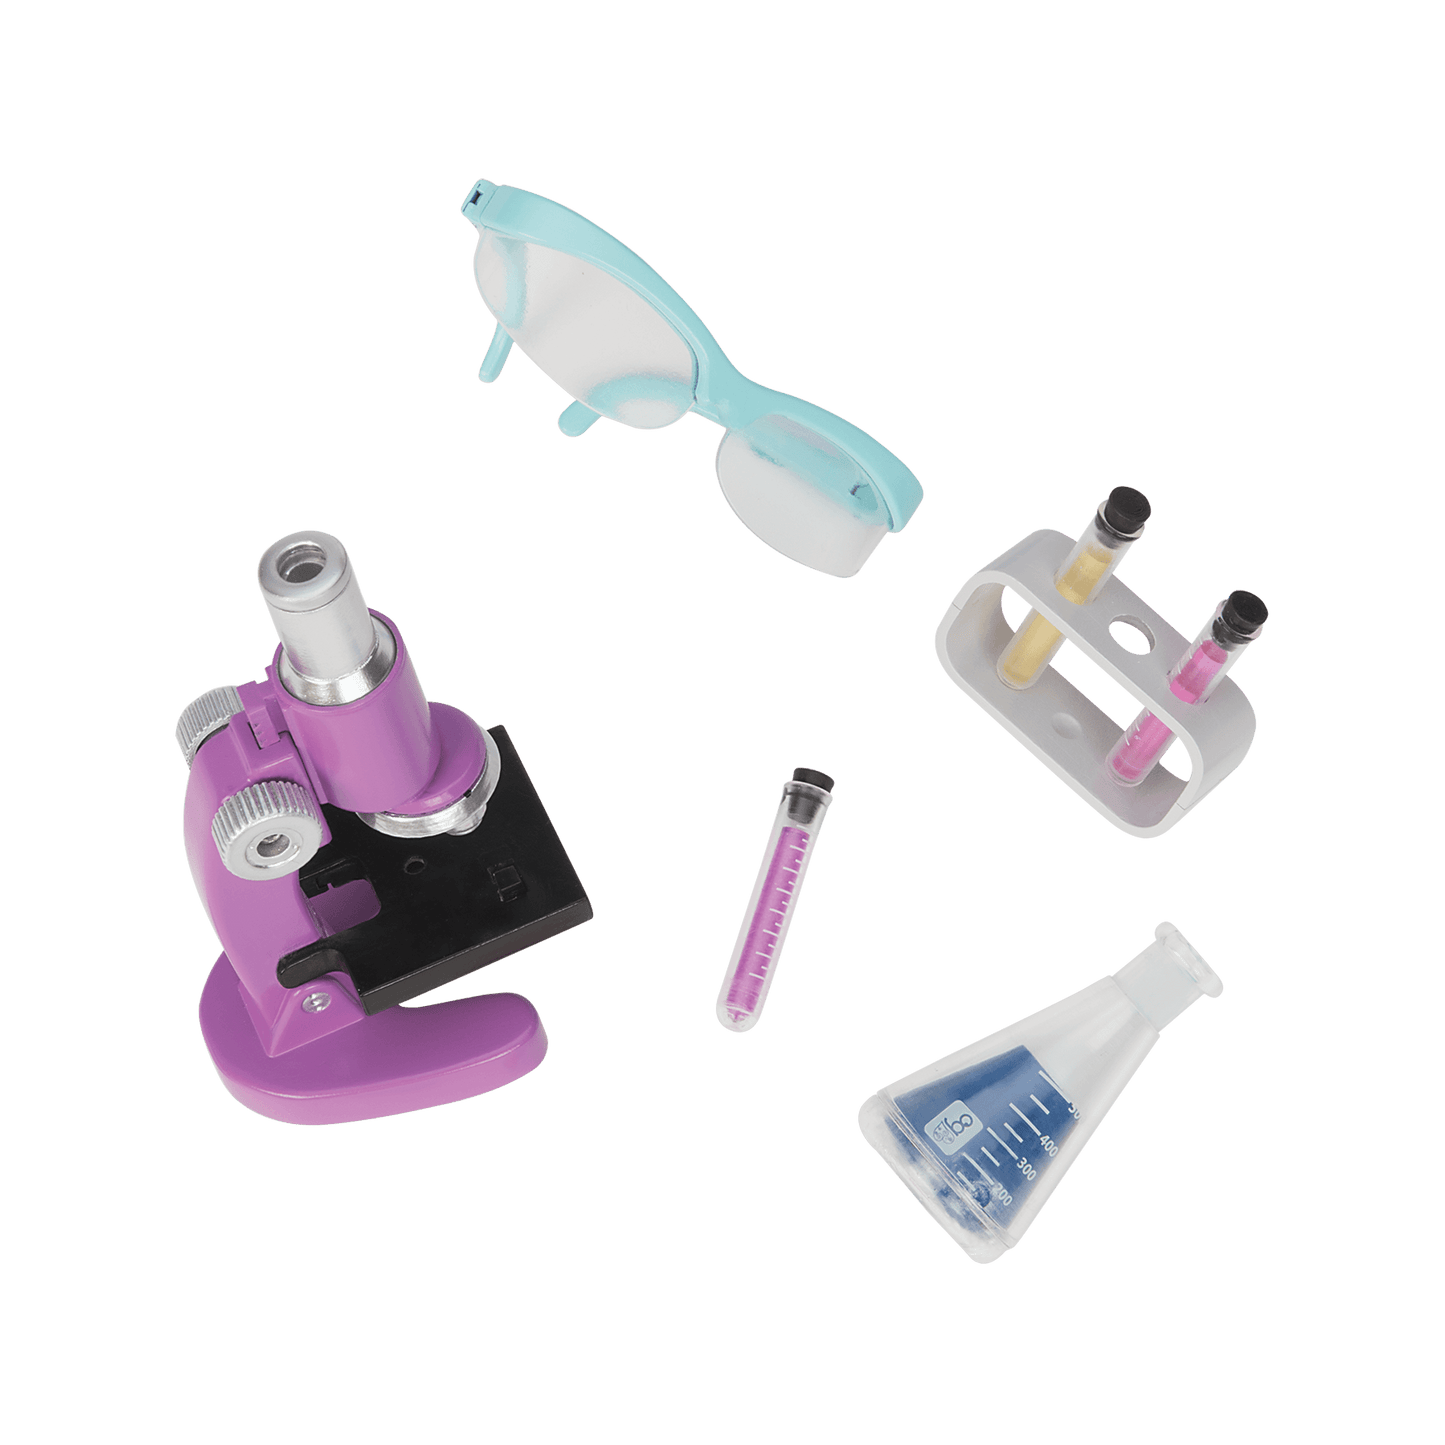 Our Generation microscope set